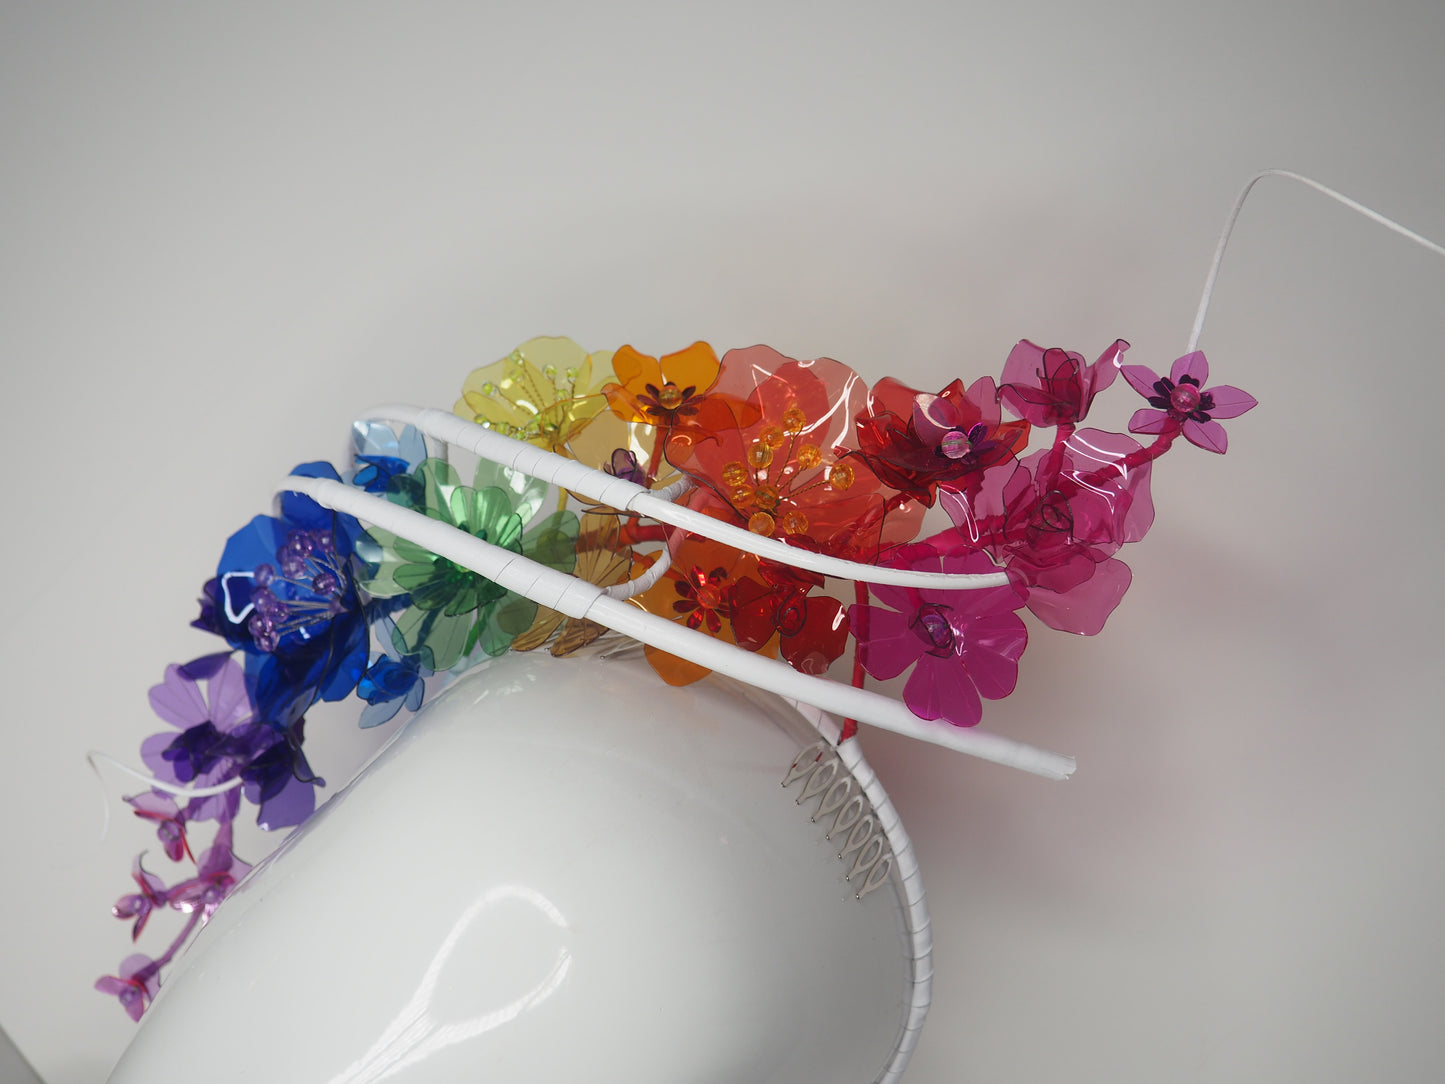 Rainbow Connection - Rainbow crystoform headband with White quills